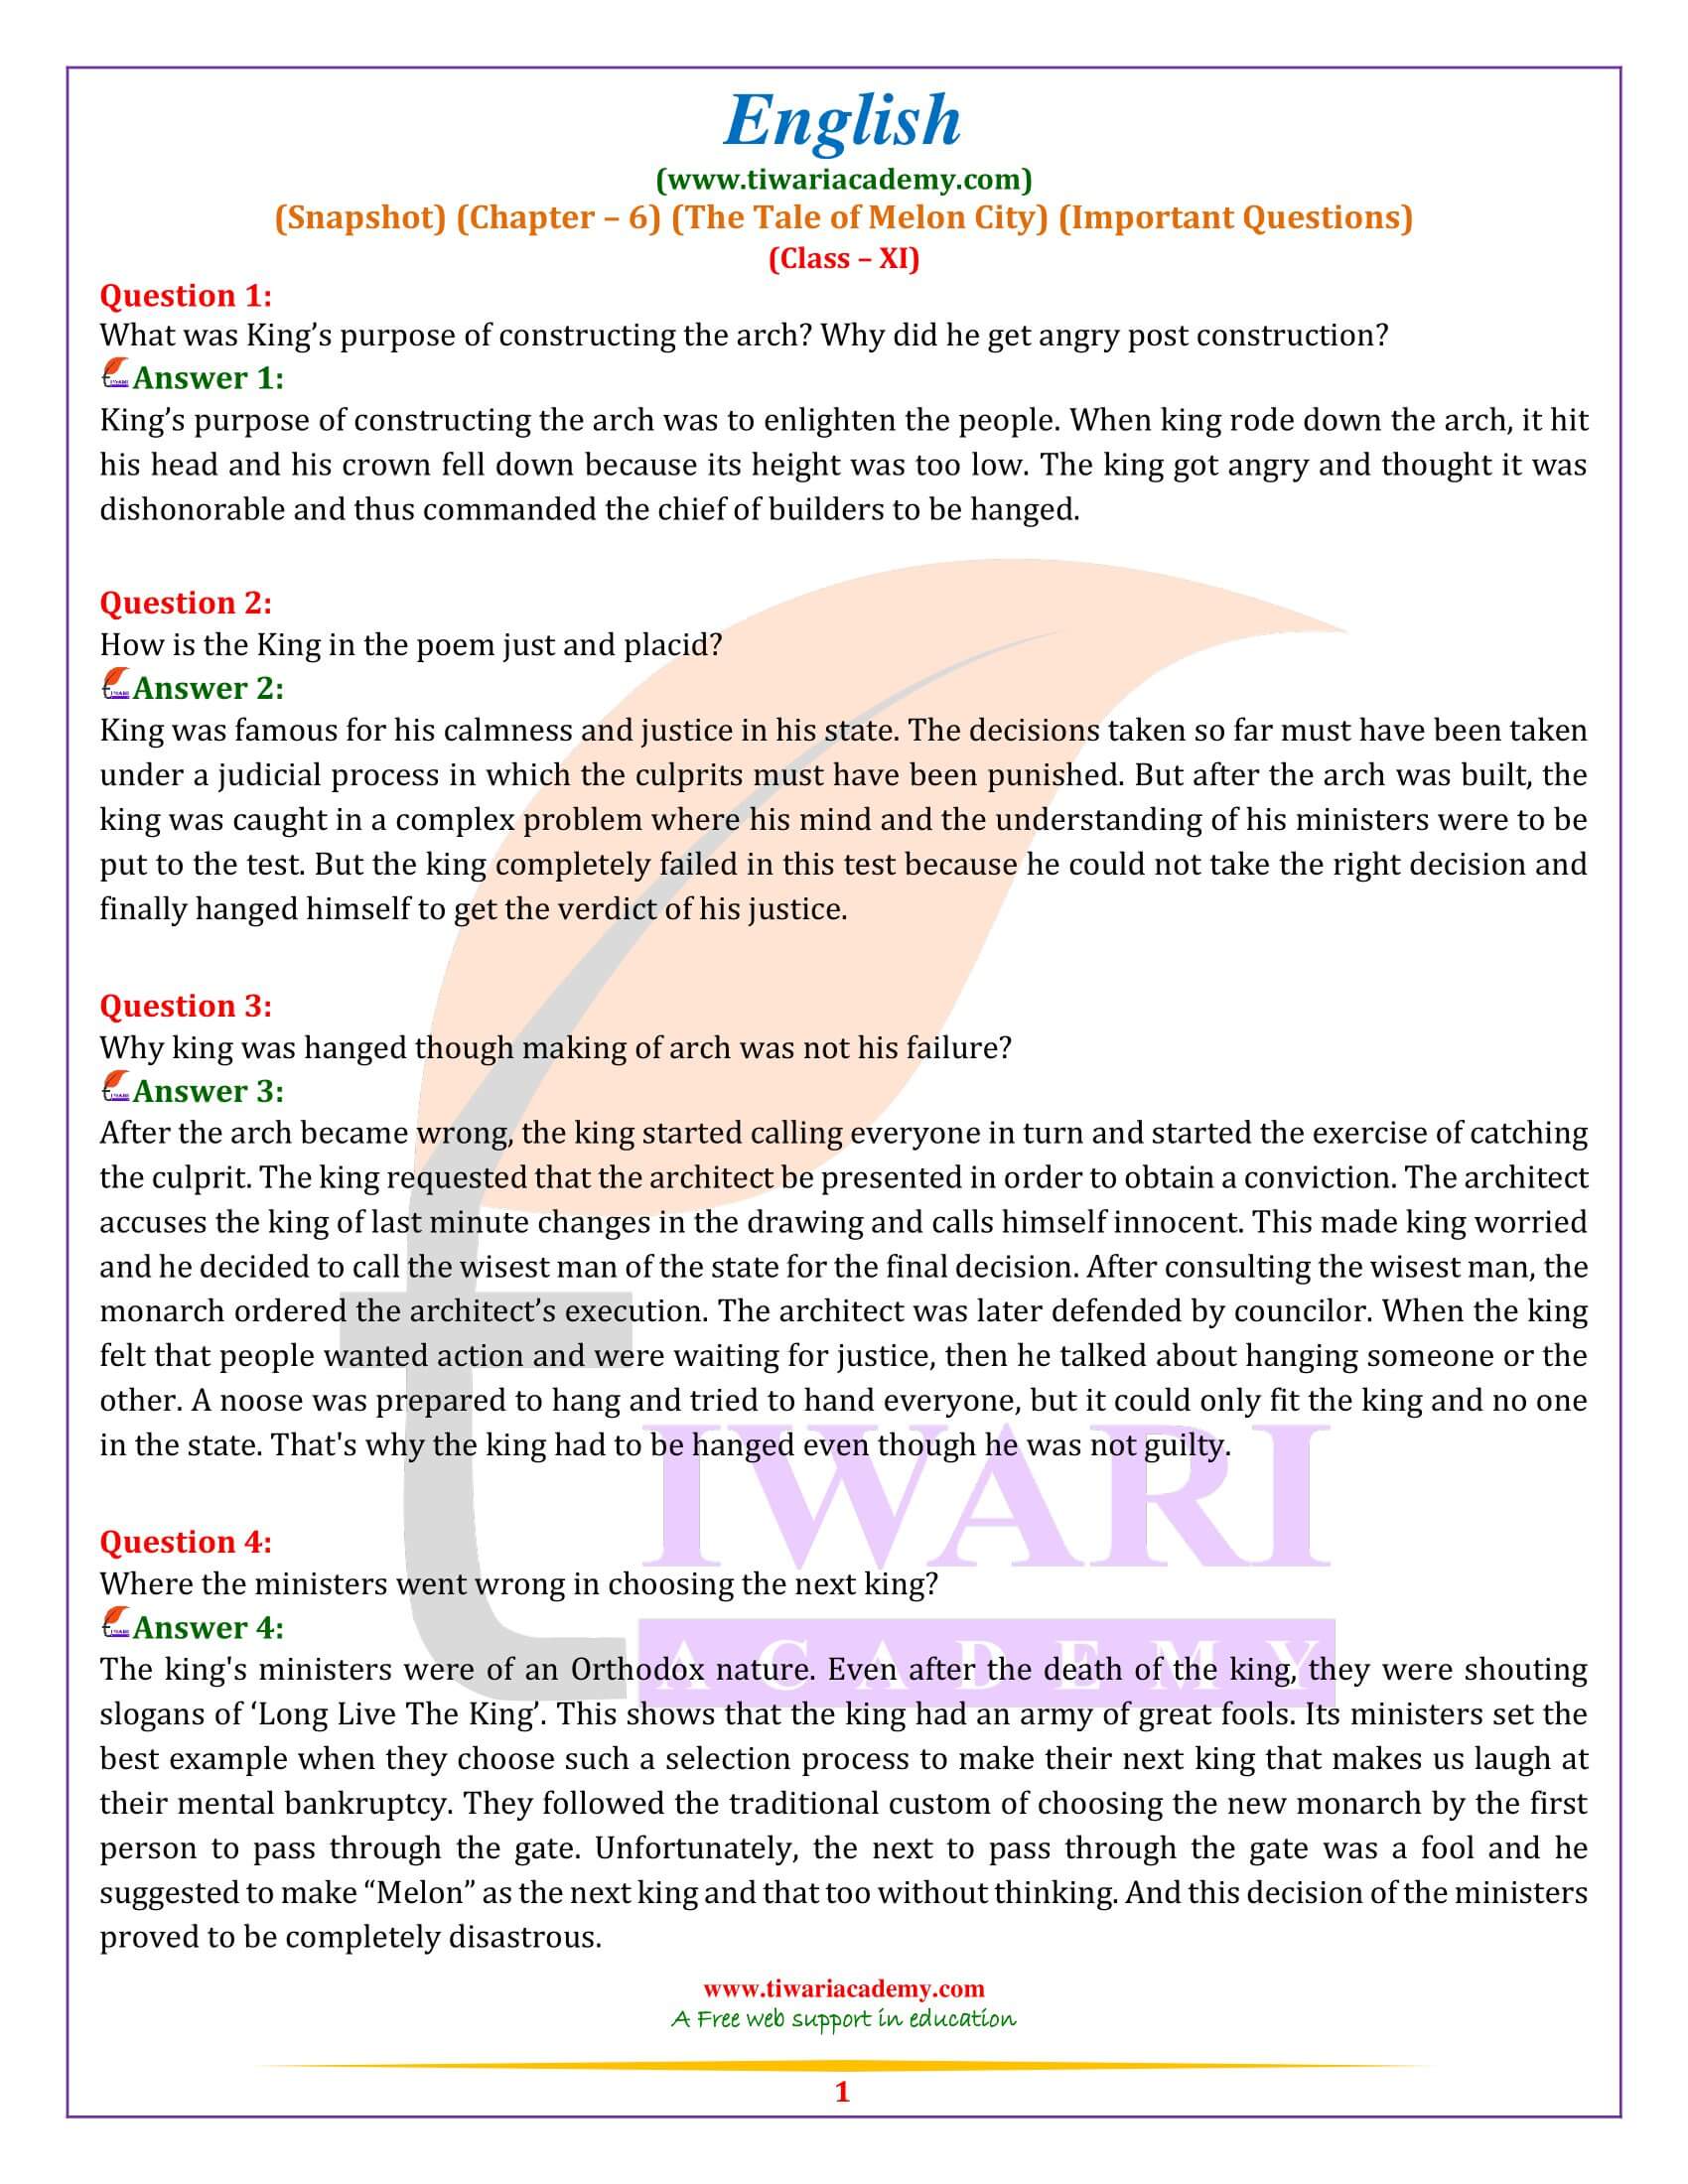 Class 11 English Snapshots Chapter 6 Important Questions